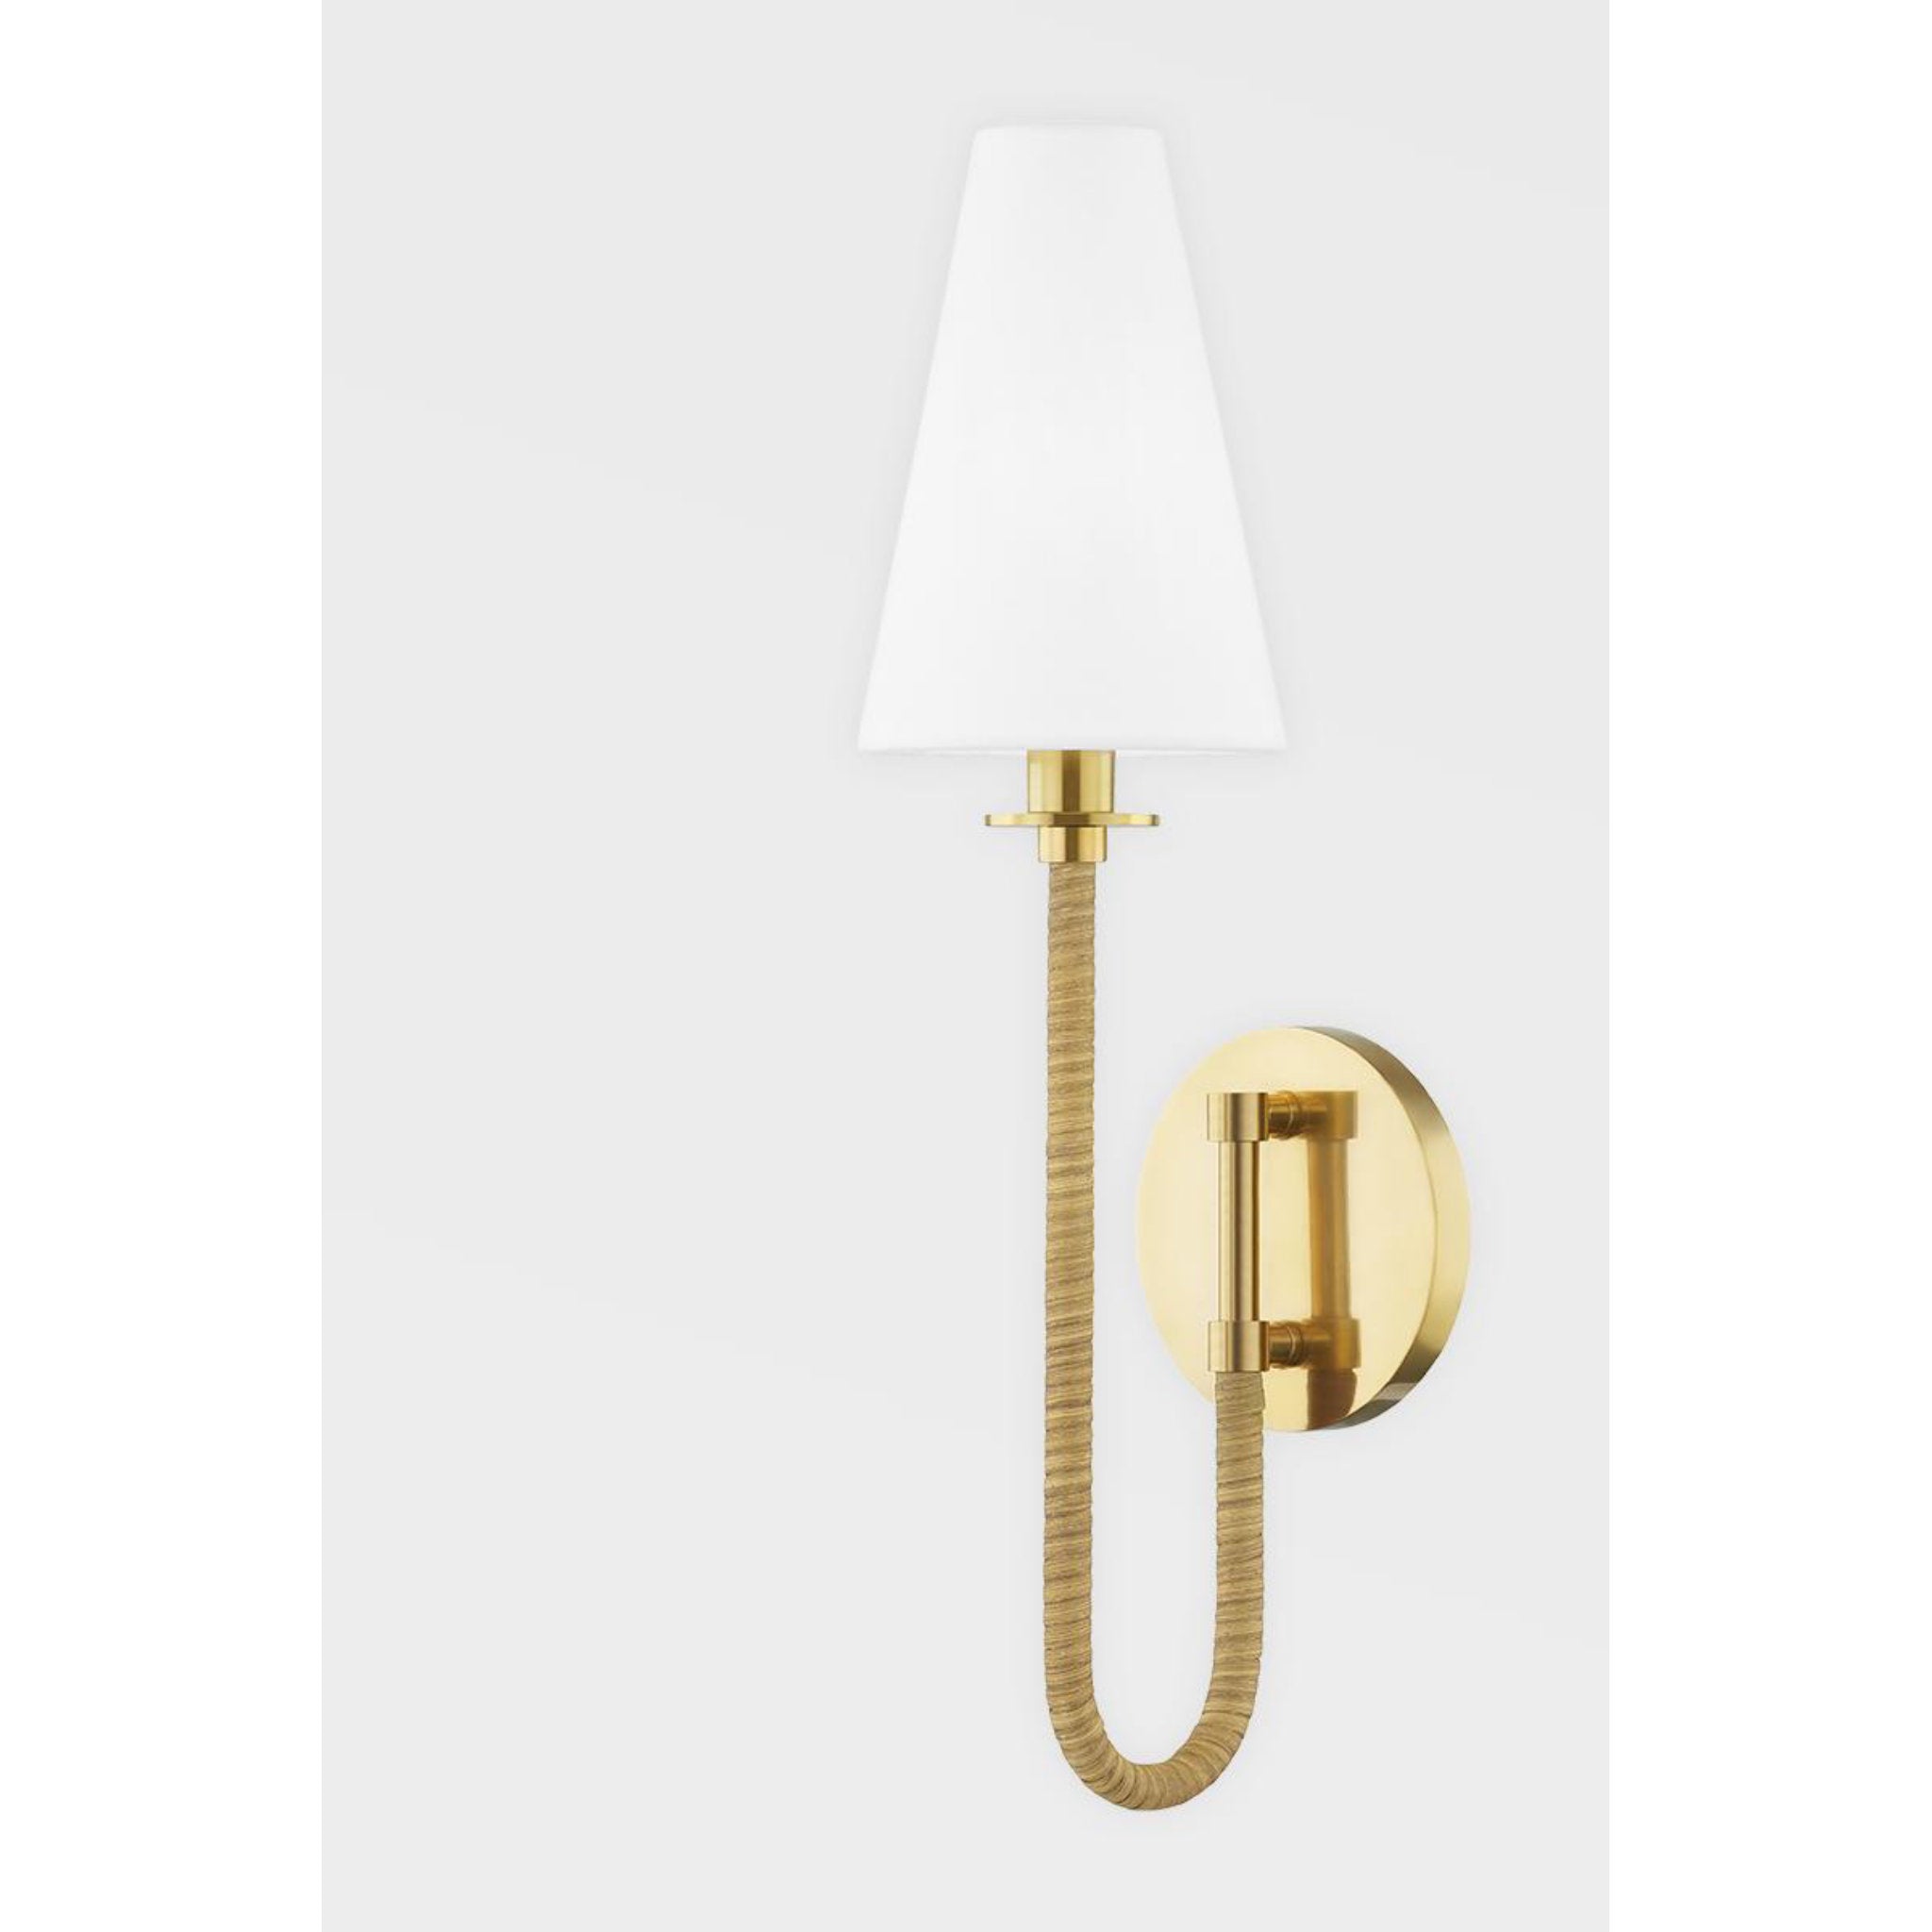 Ripley 1 Light Wall Sconce in Aged Brass